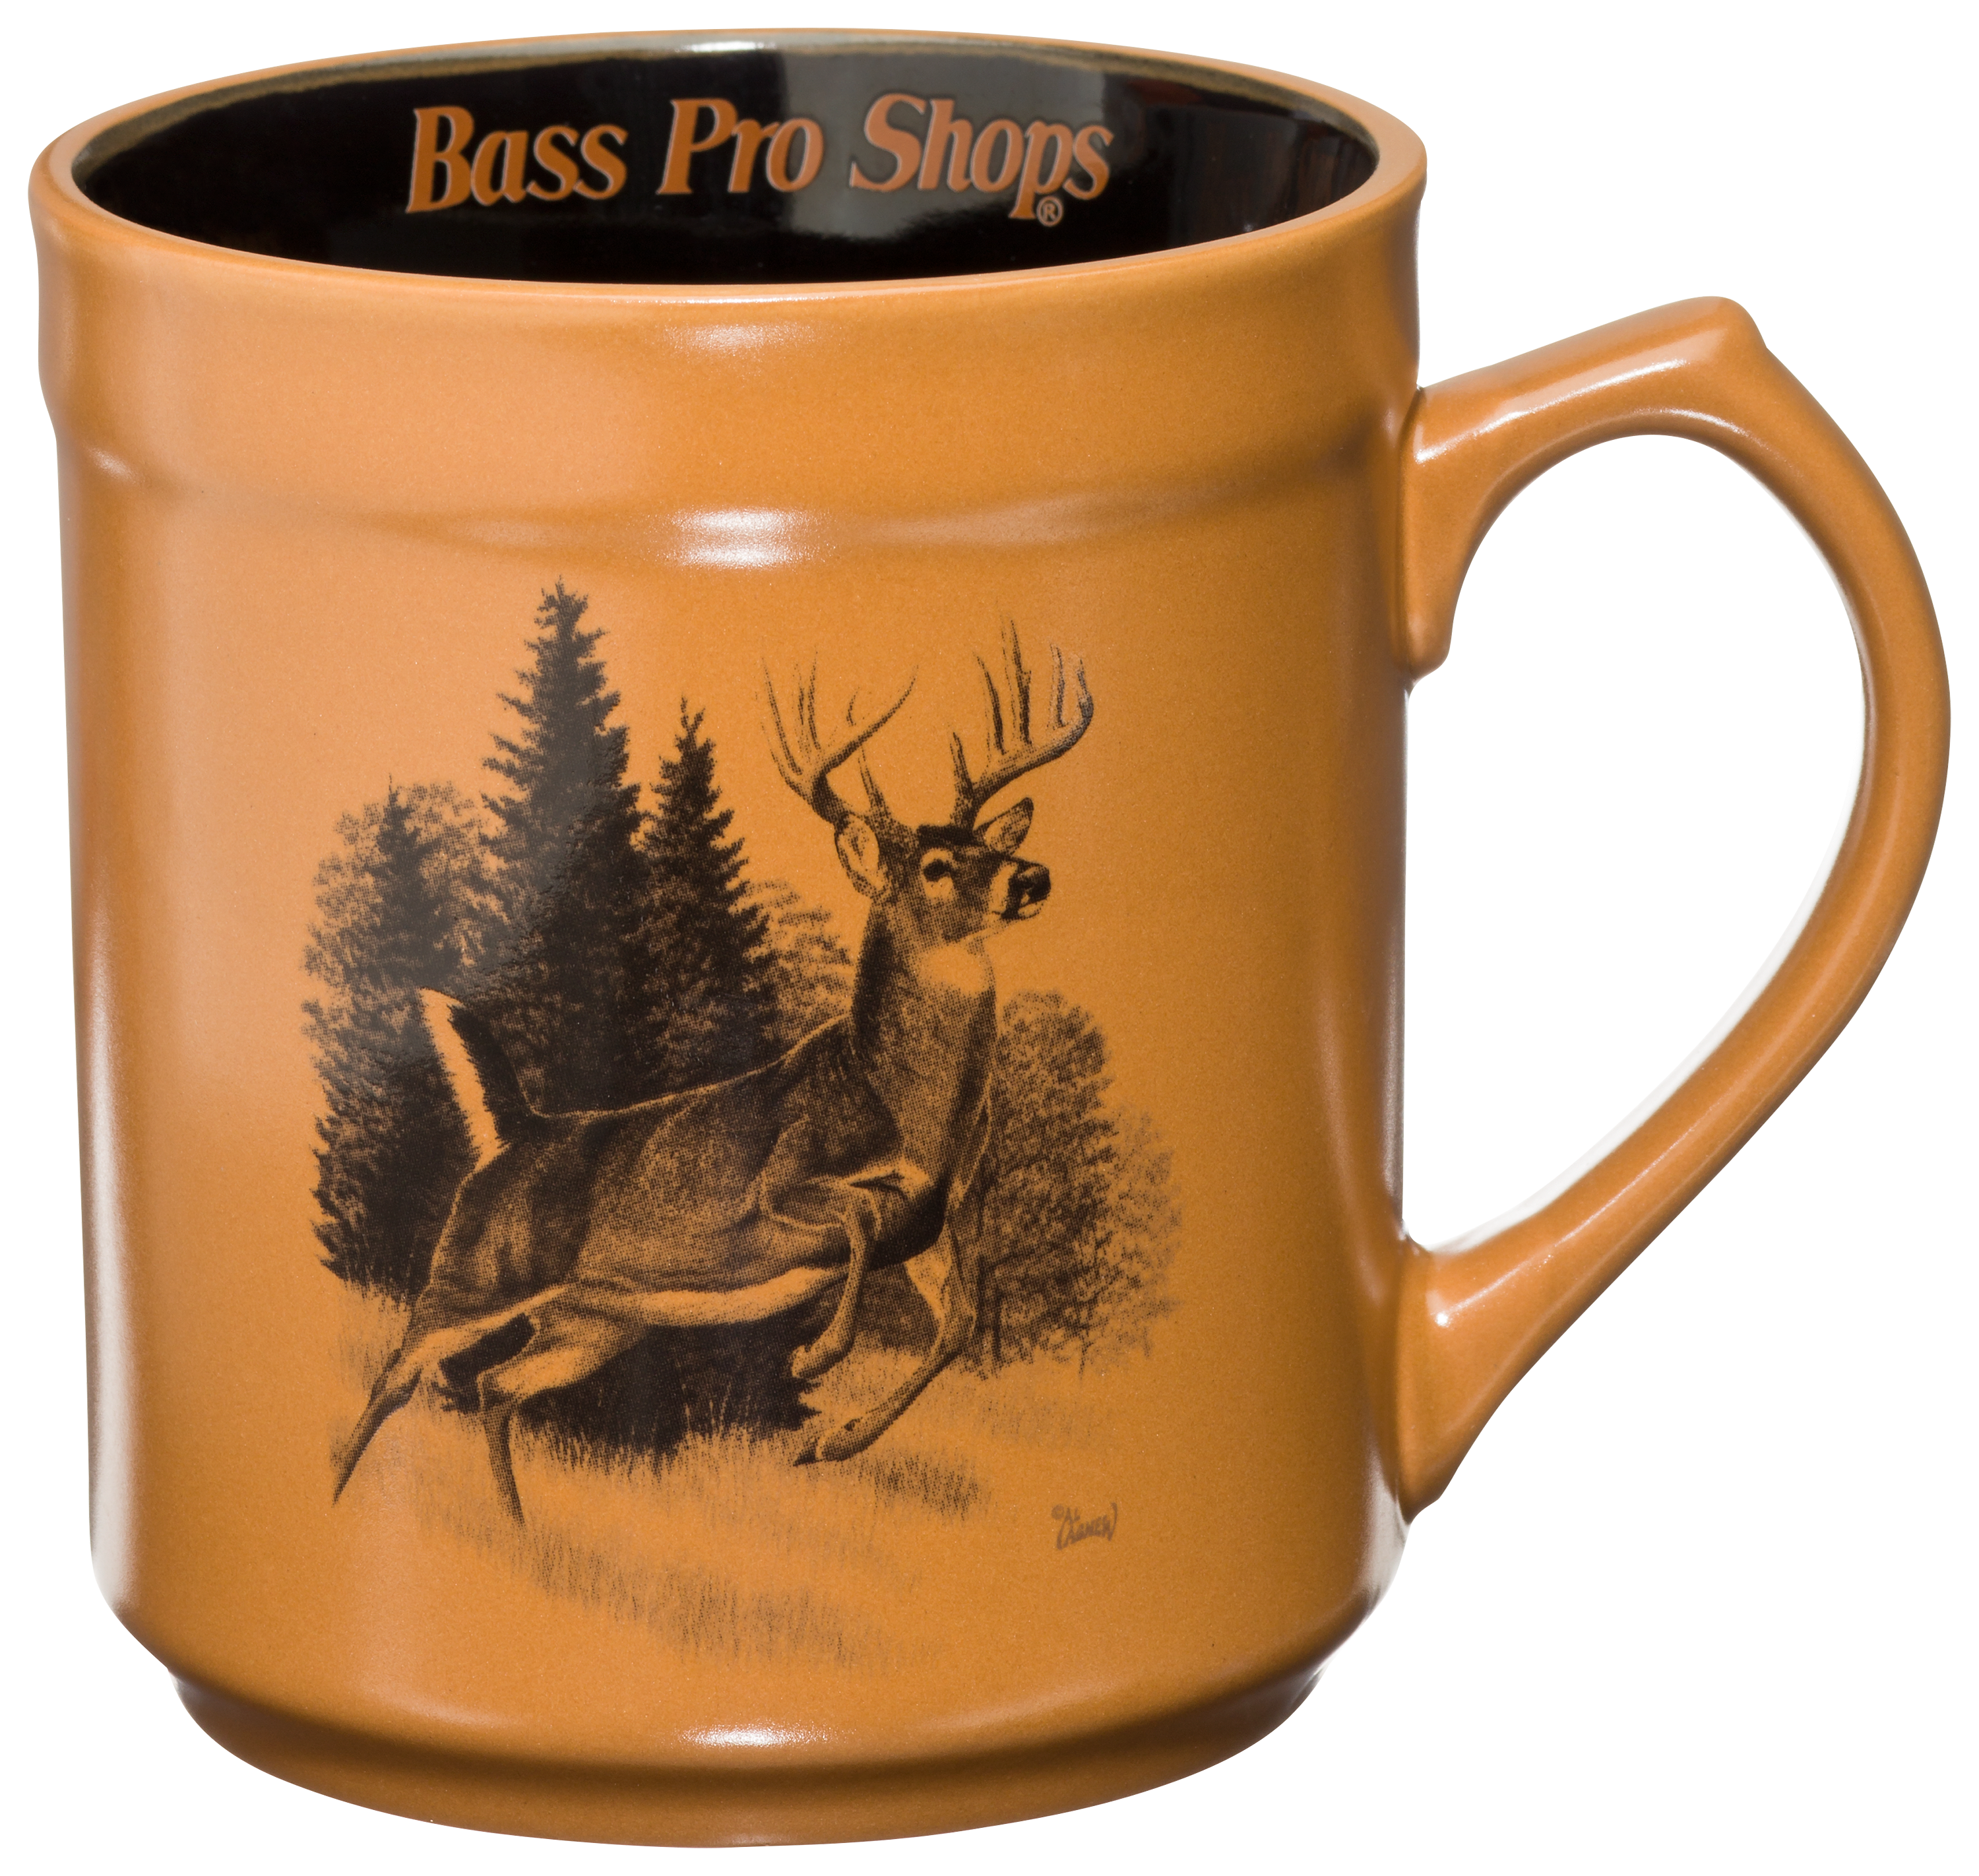 Bass Pro Shops Trigger Mug with Whitetail Deer by Al Agnew